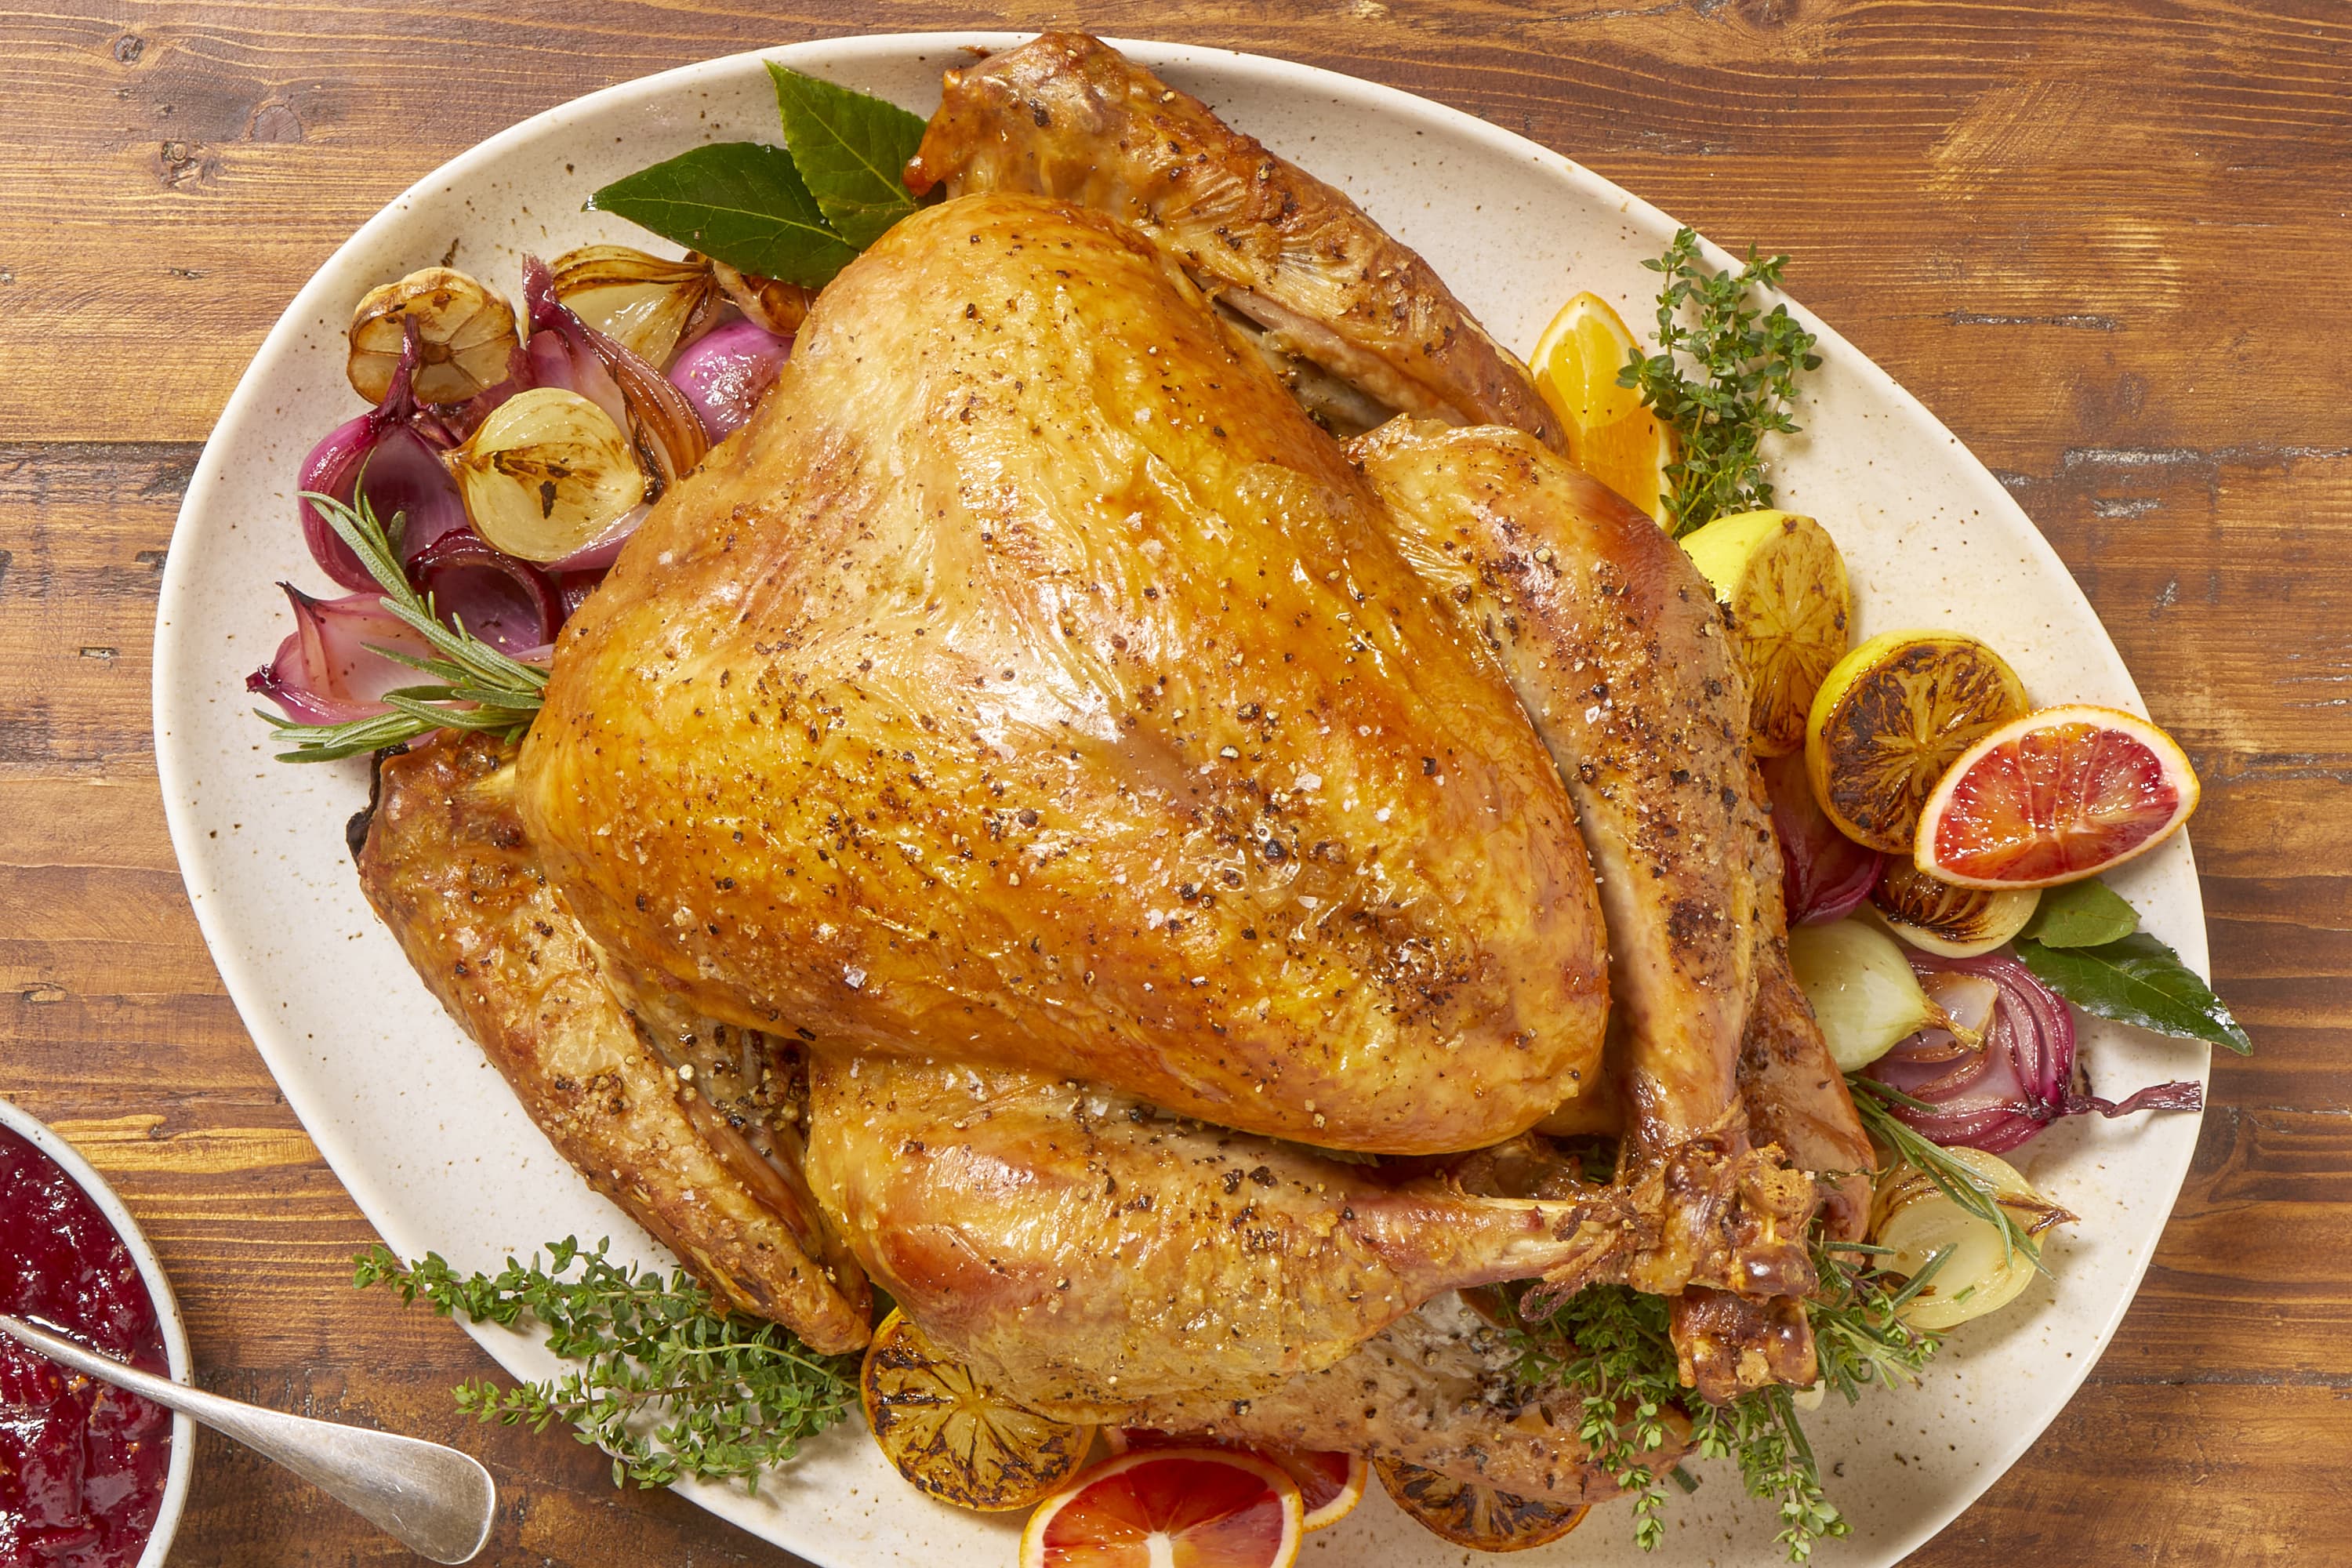 https://cdn.apartmenttherapy.info/image/upload/v1695677226/k/Photo/Recipes/2023-09-how-to-dry-brine-a-turkey/how-to-dry-brine-a-turkey-674-horizontal.jpg